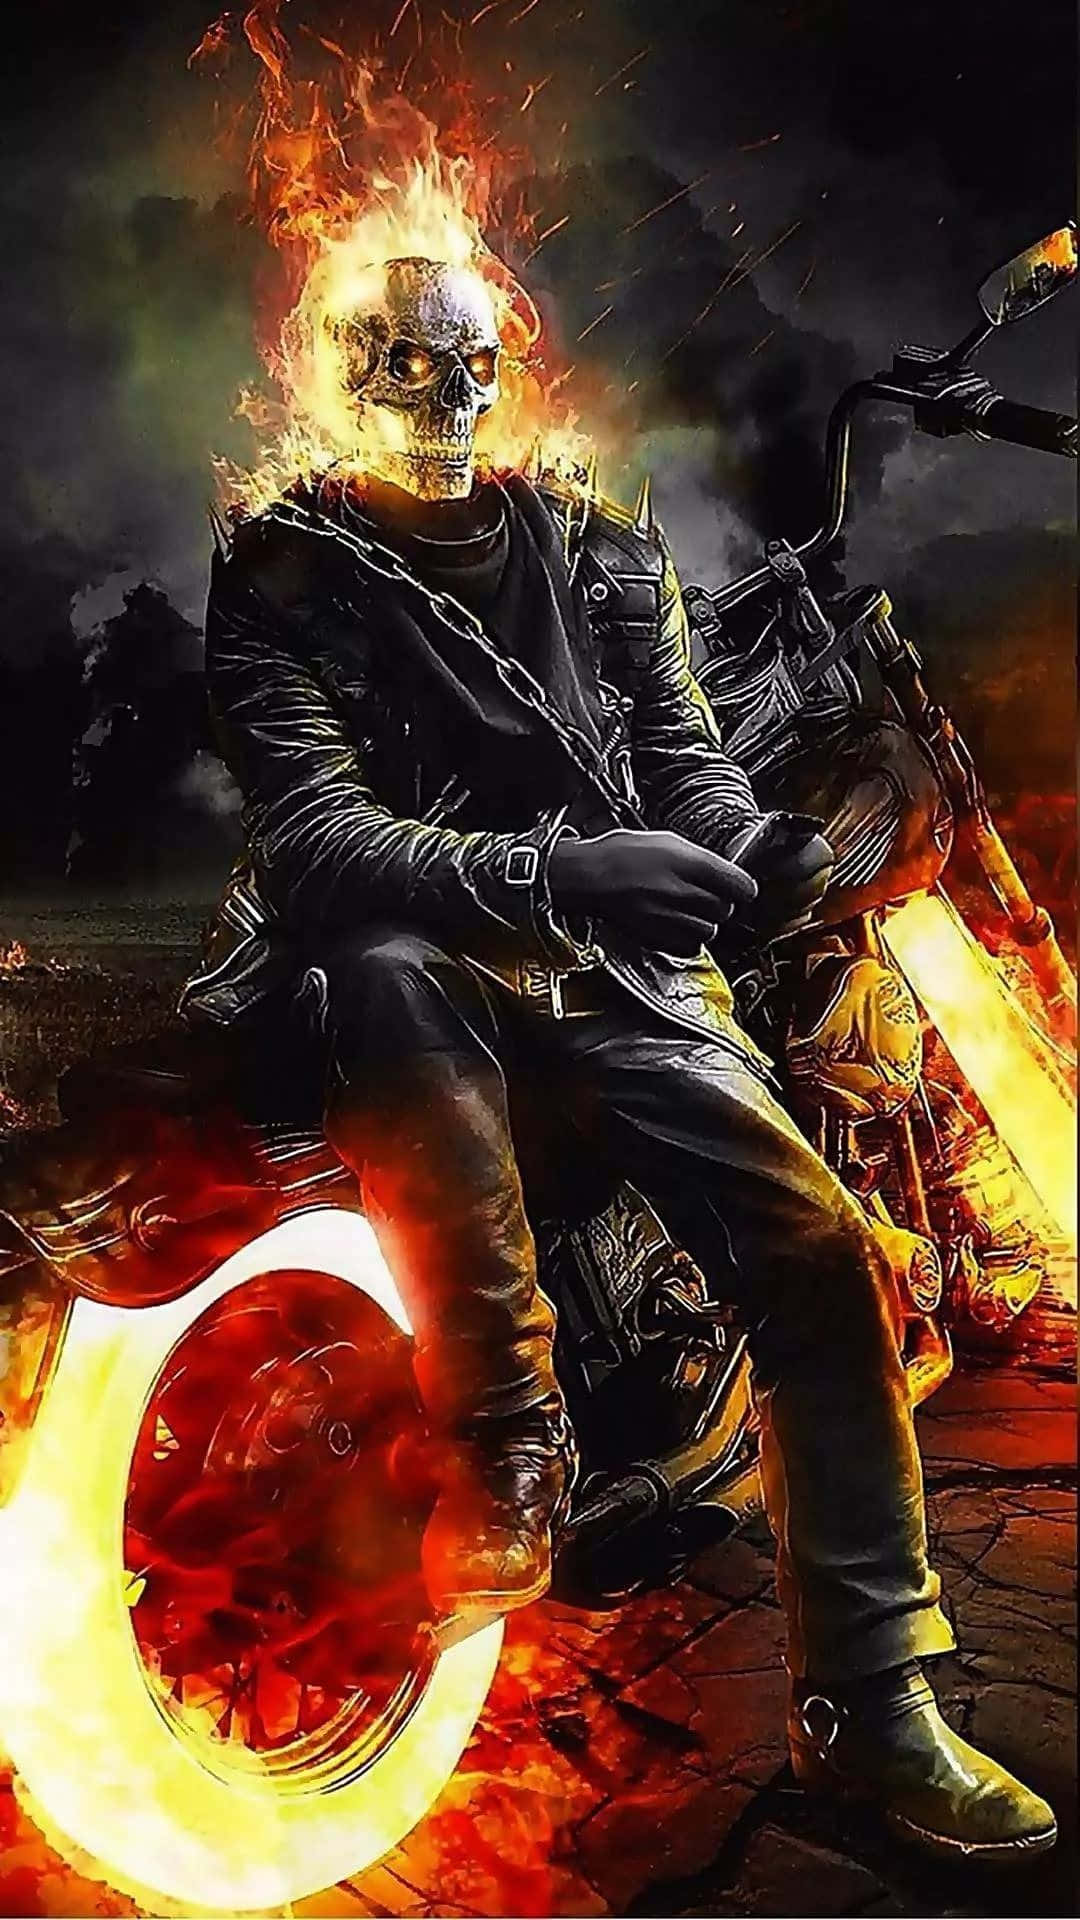 Experience the fiery action of Ghost Rider!